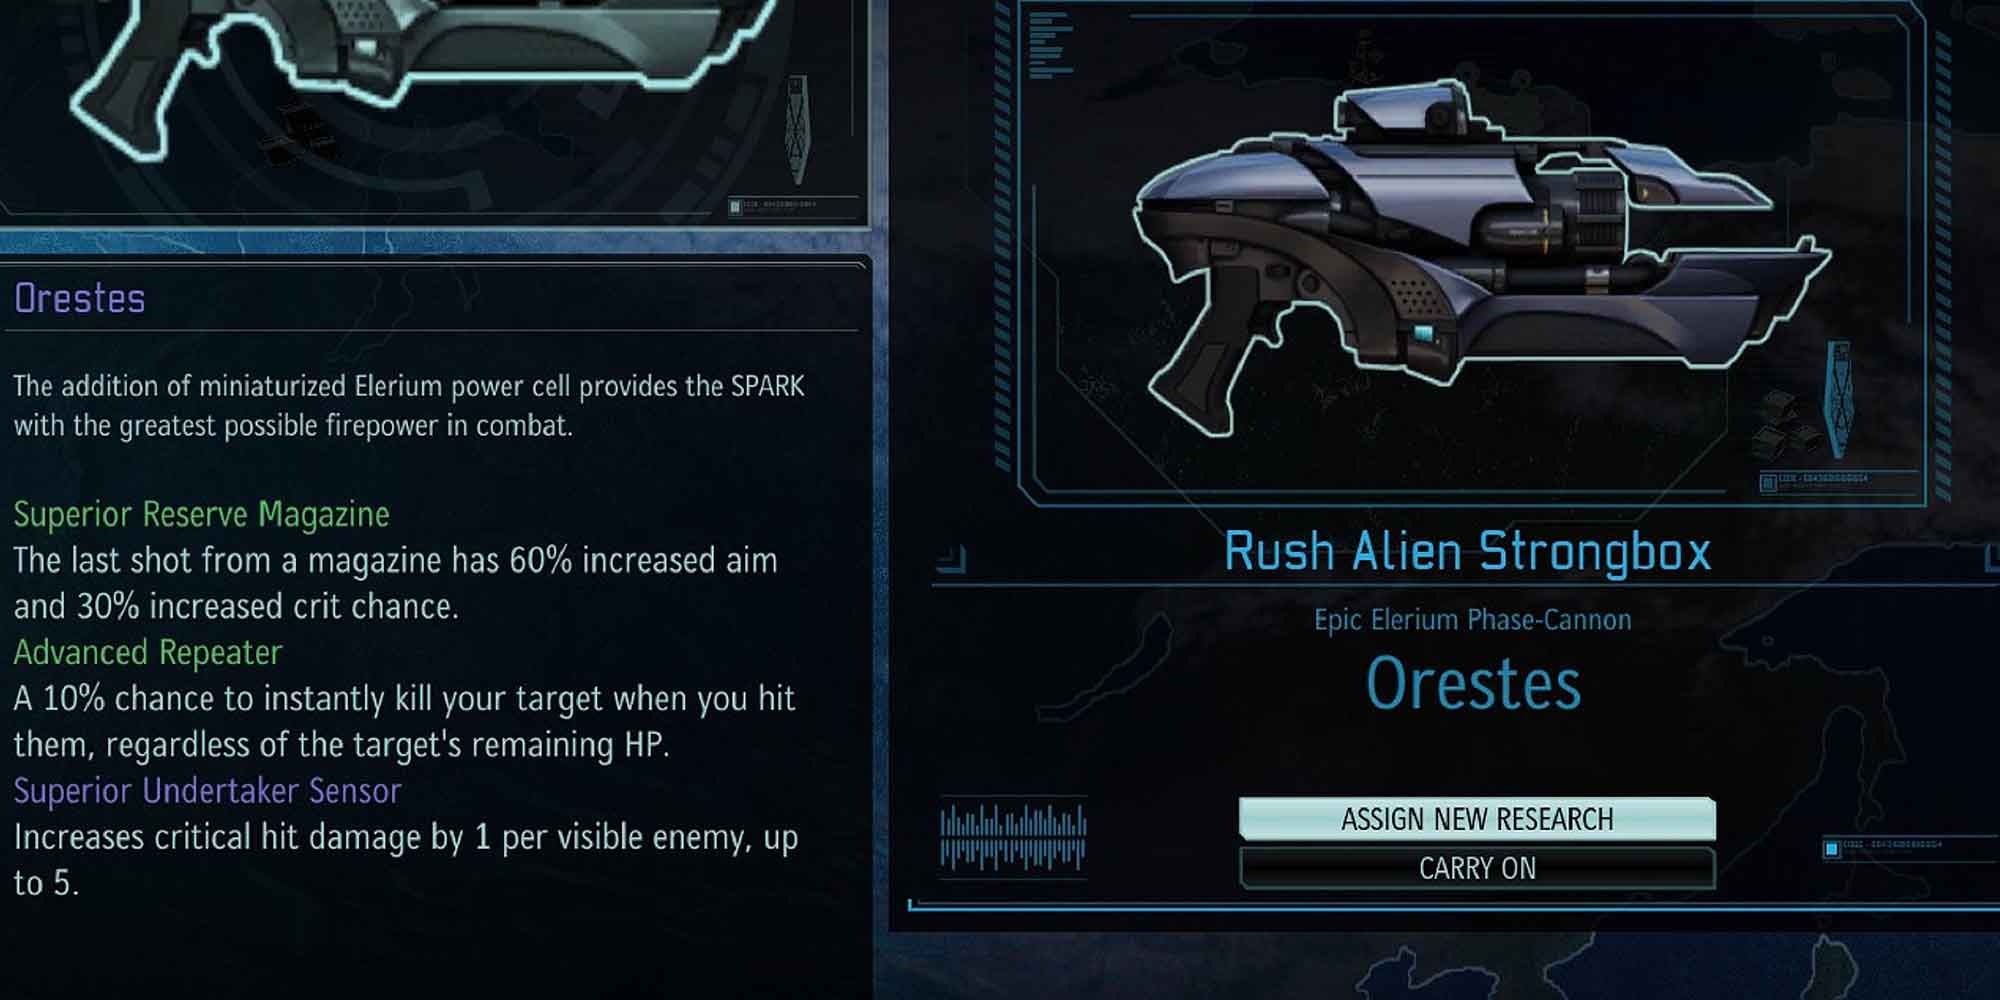 The epic variant of the Elerium Phase Cannon weapon in Xcom 2